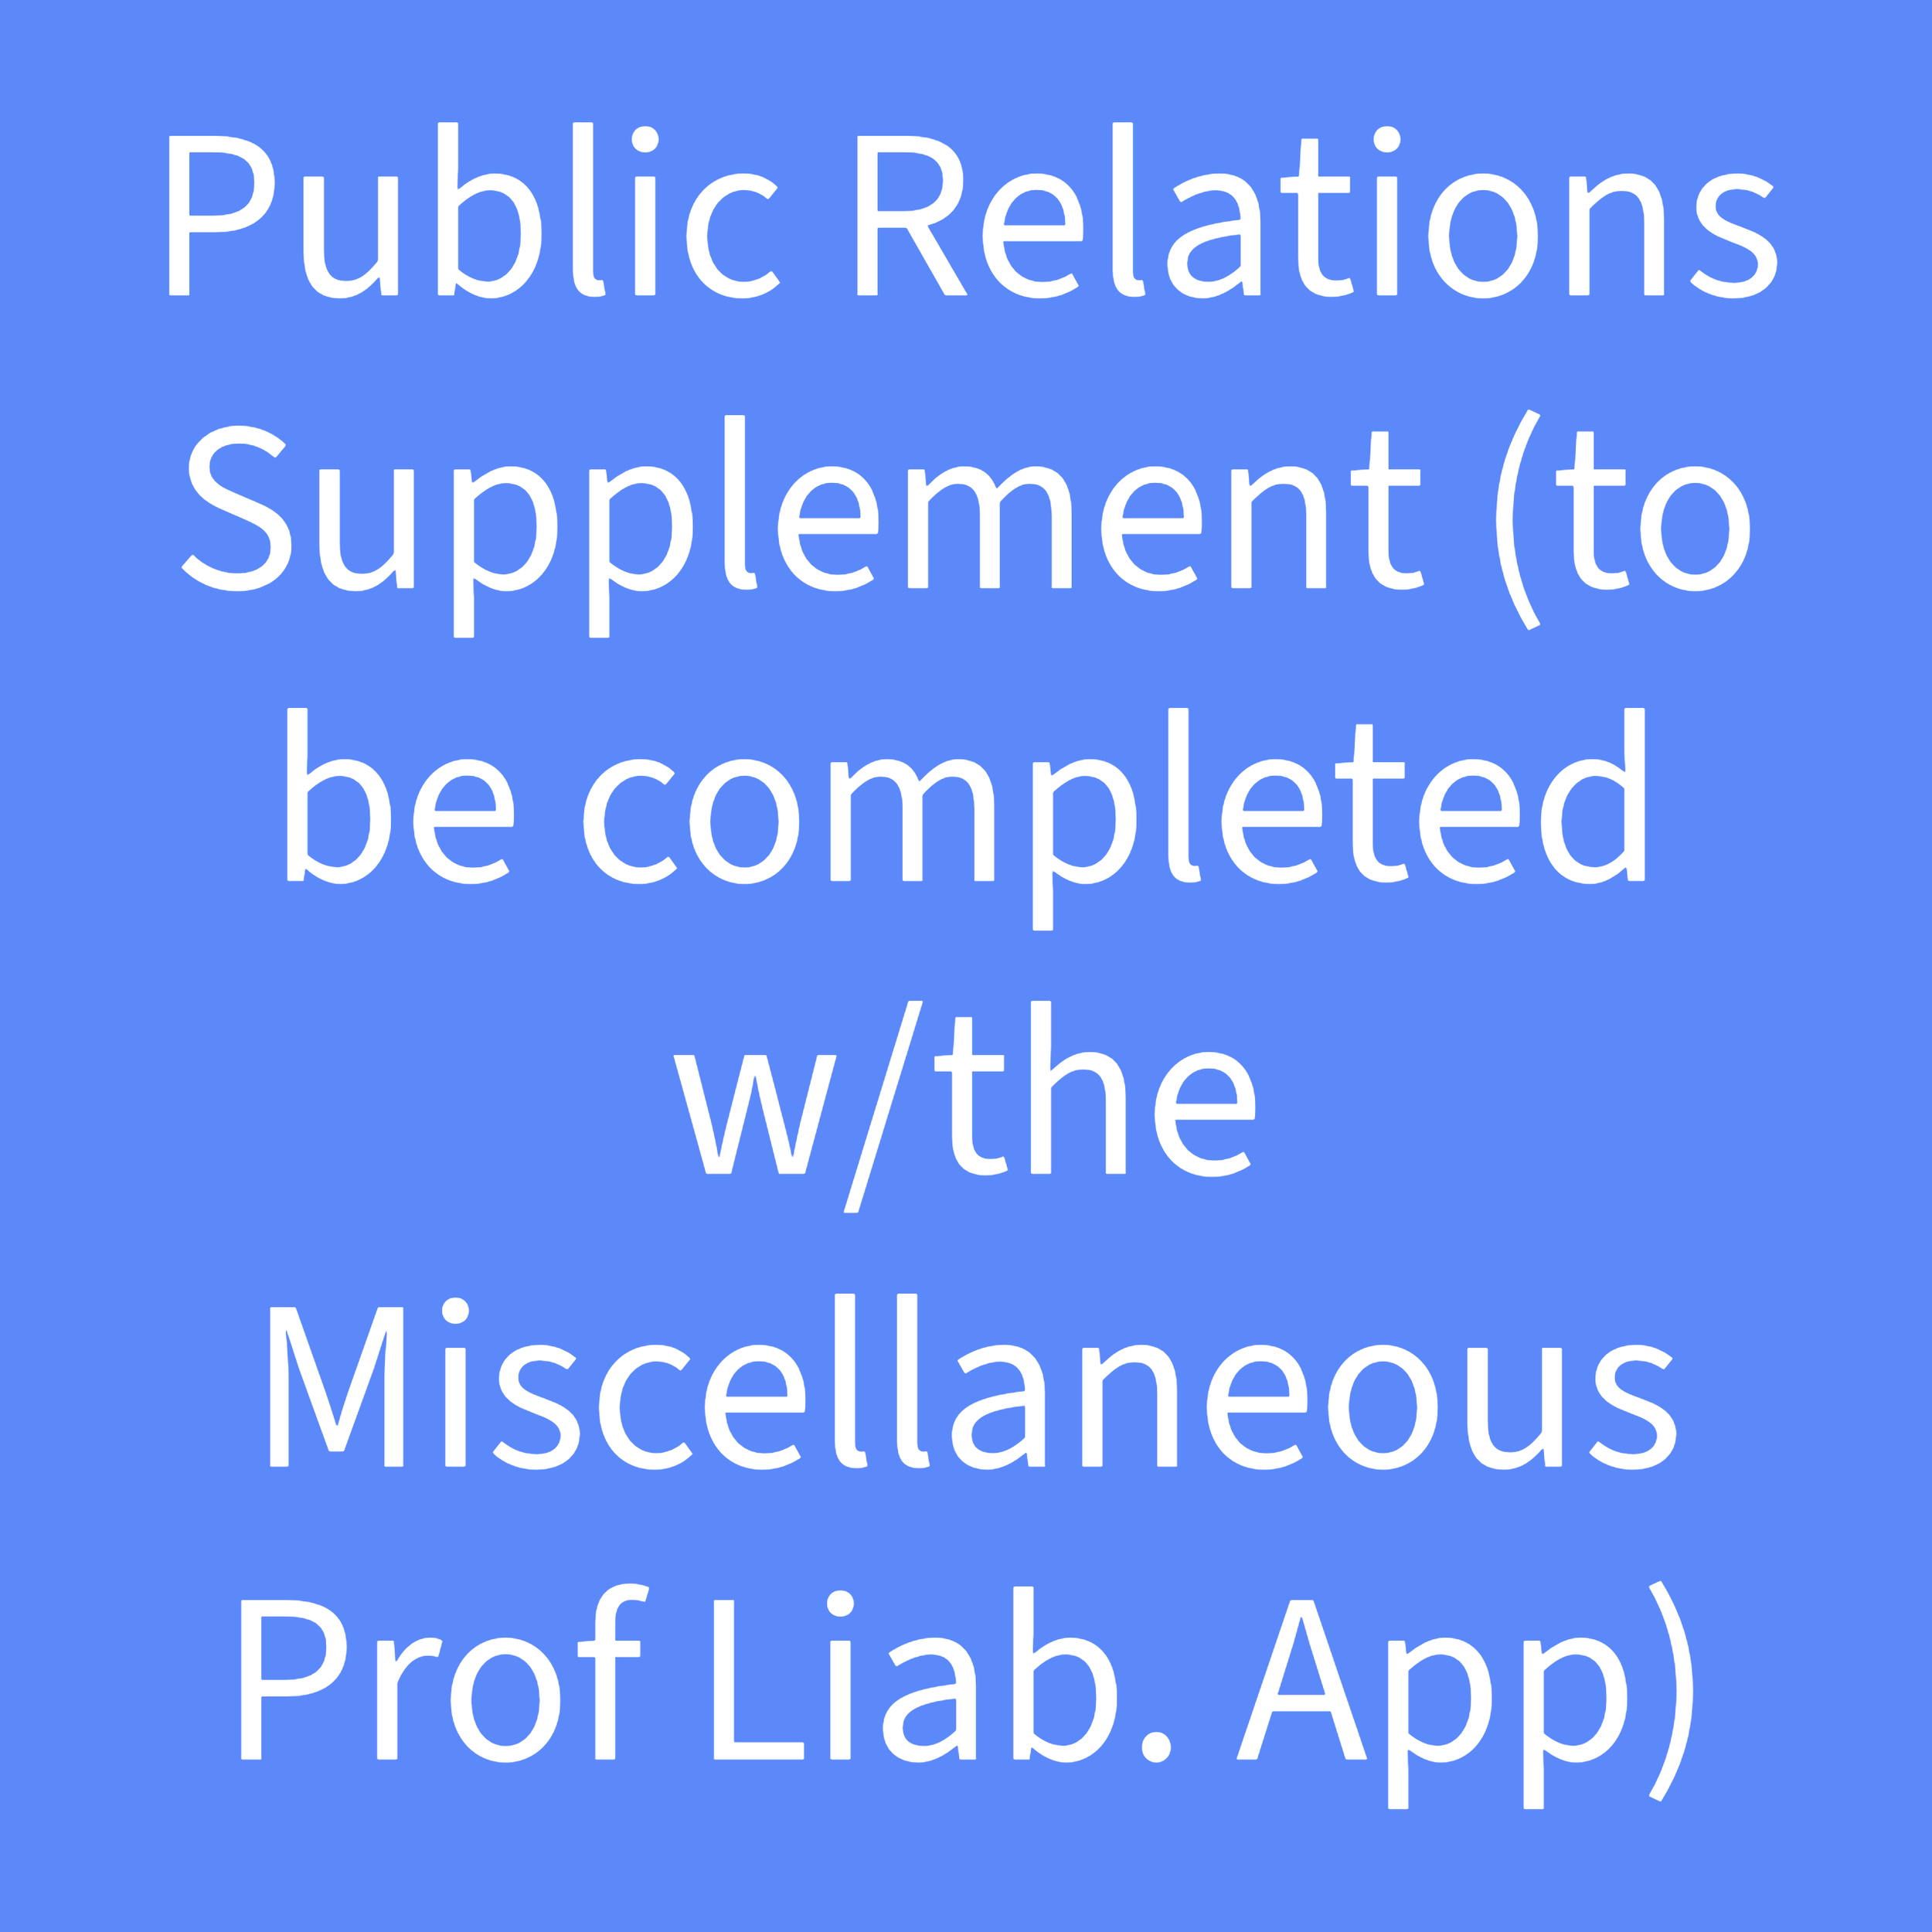 Misc. Professional Liability Apps-5-Public Relations Supplement.png